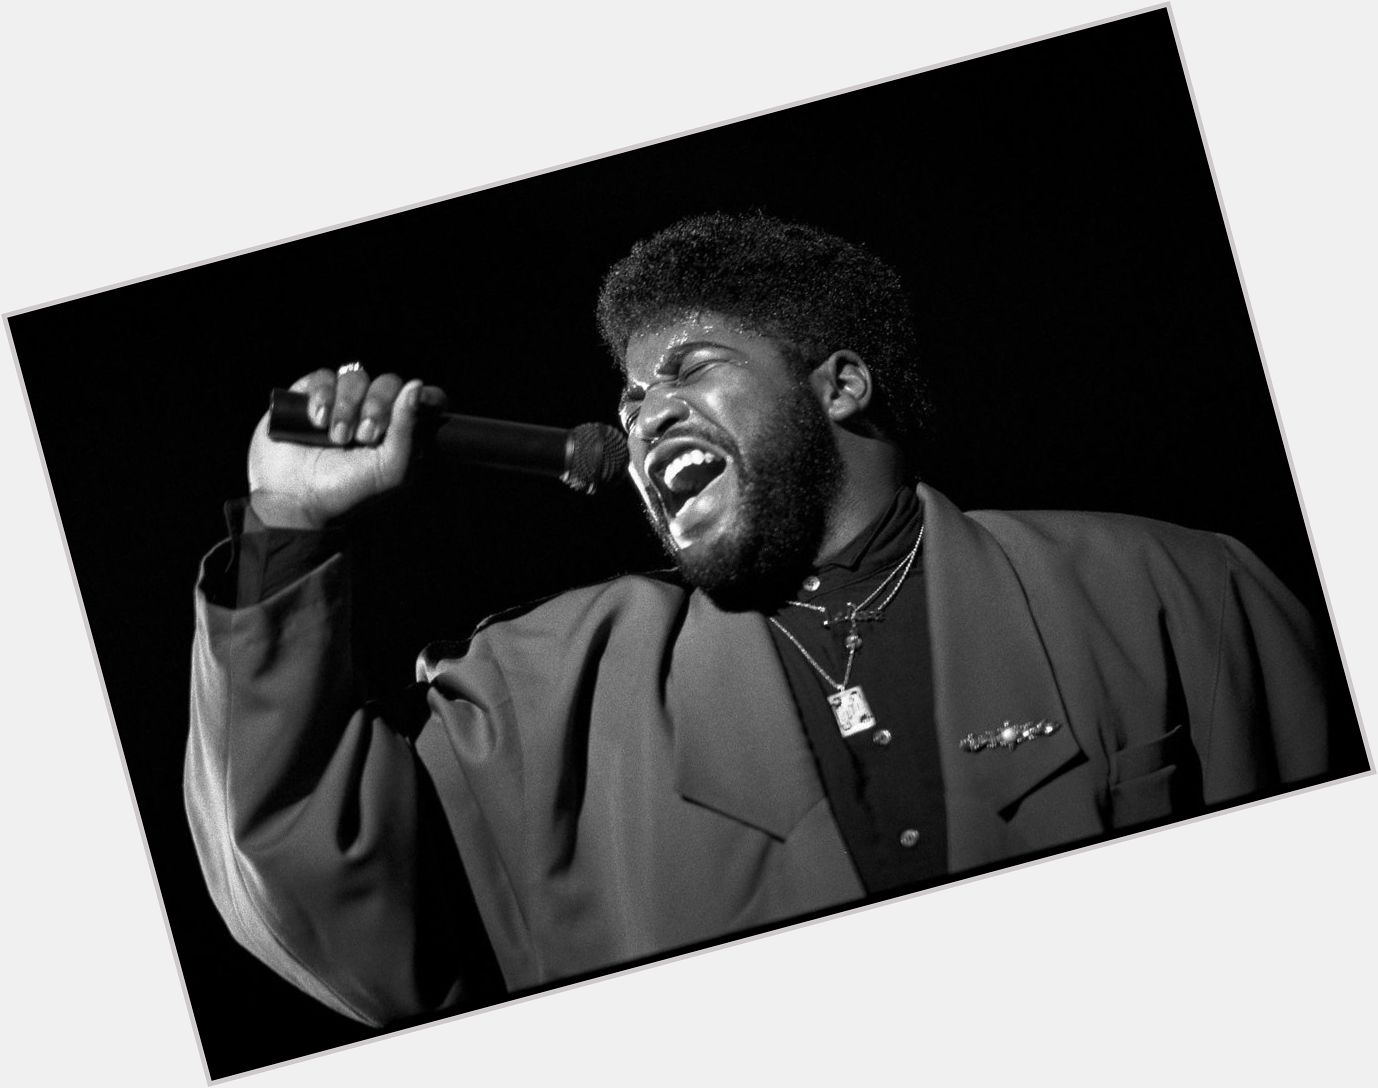 Happy Birthday to the late Gerald Levert! What are your top 4 songs by him? 